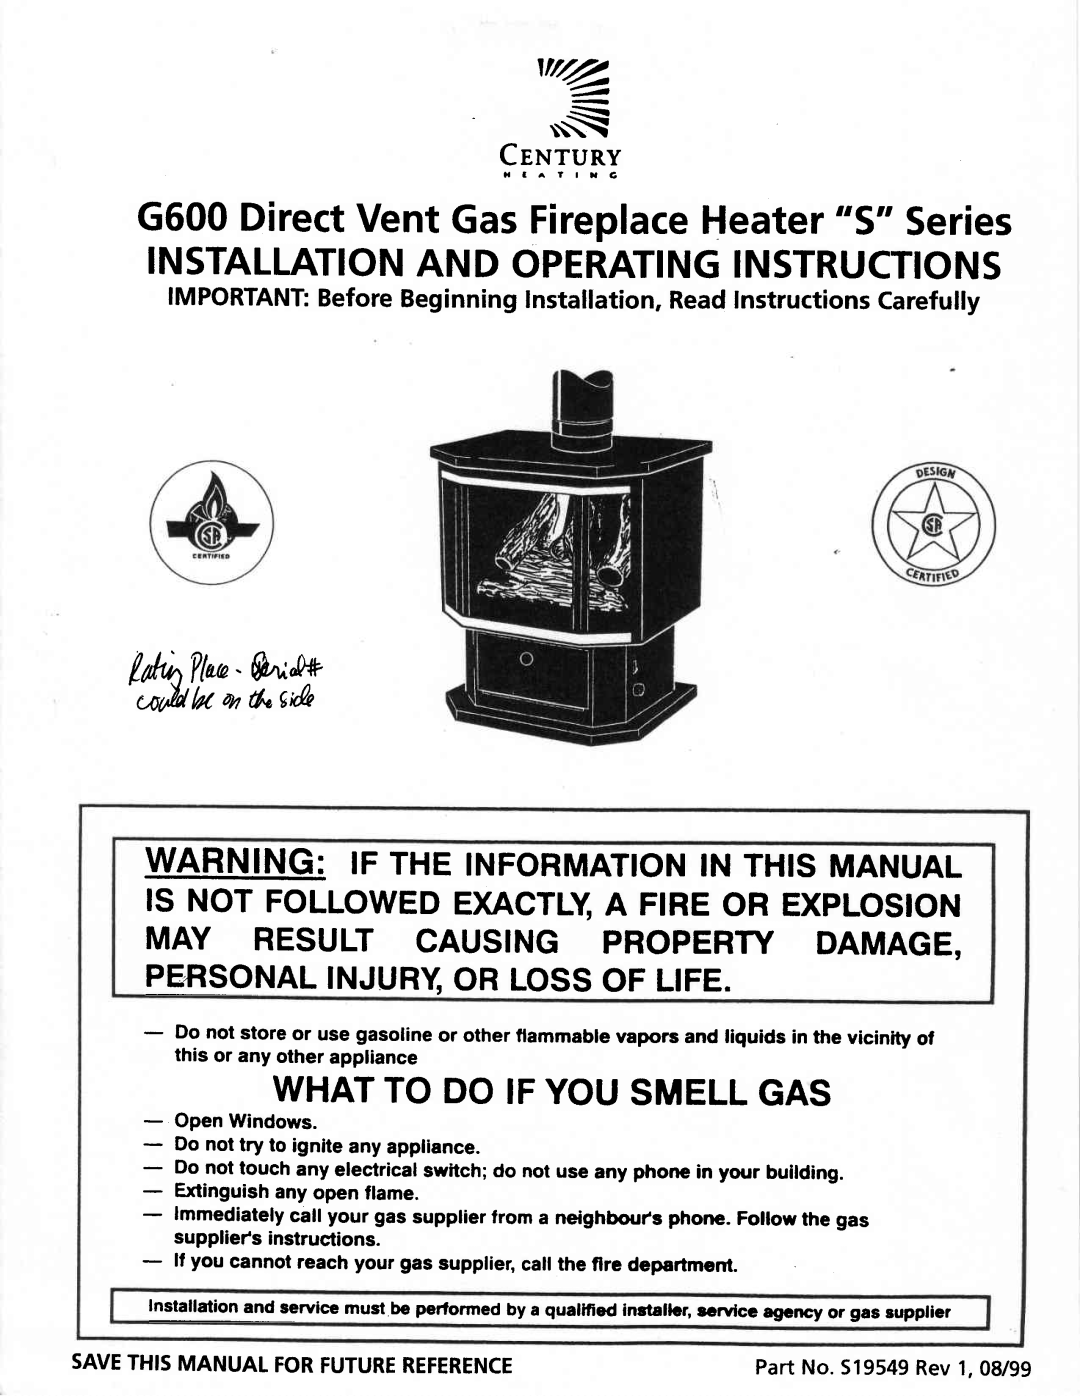 Vermont Casting manual 9rlrtsy, G600Directvent GasFireplace s Heater series, Whatto Do Ifyousmellgas, ep ldrt \lor 